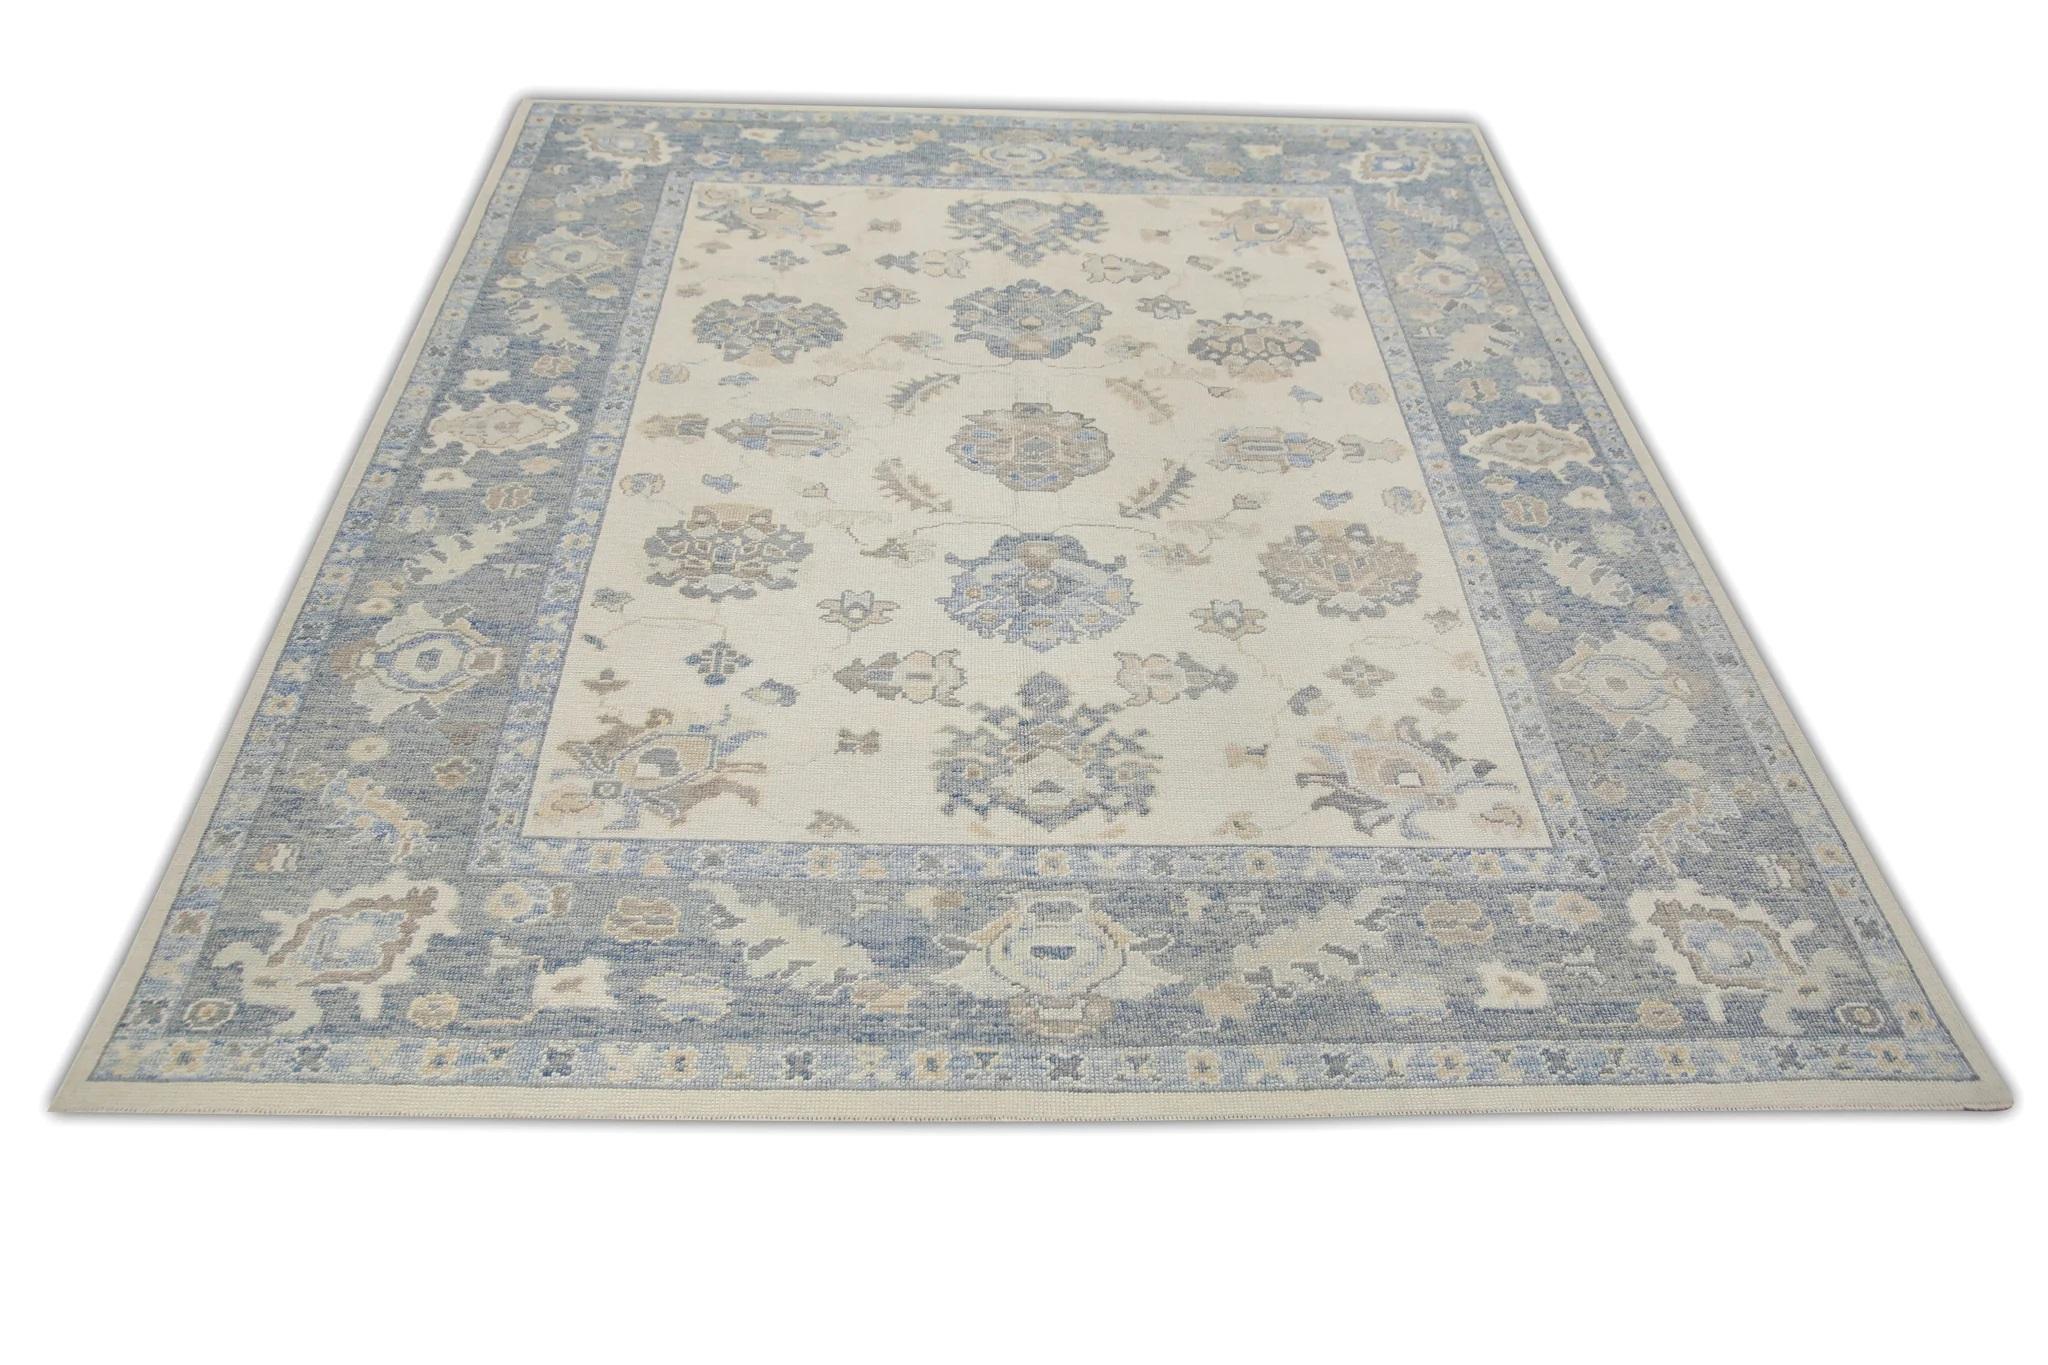 Contemporary Cream & Blue Handwoven Wool Turkish Oushak Rug in Floral Design 8'5